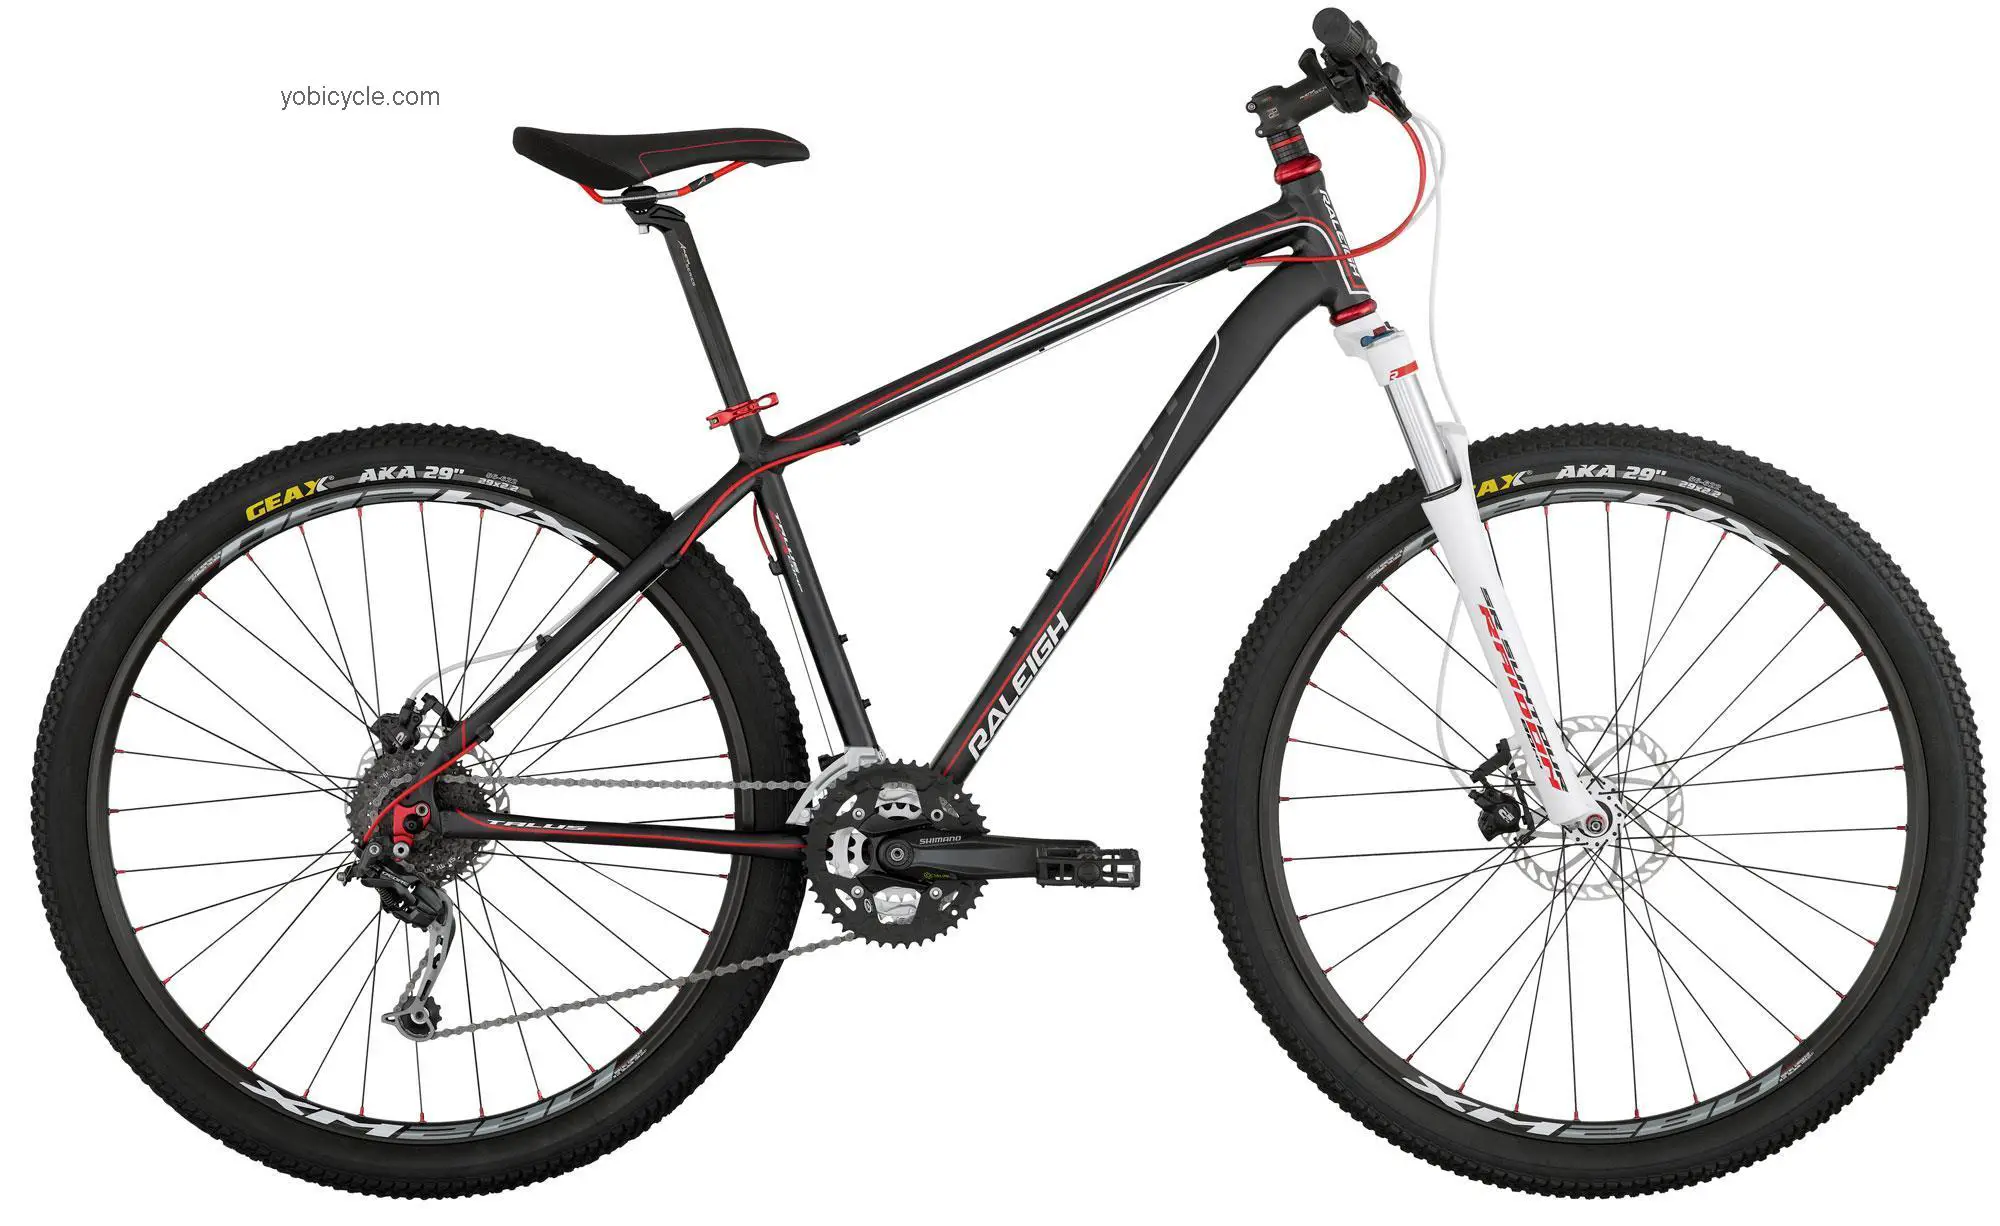 Raleigh Talus 29 Comp 2012 comparison online with competitors